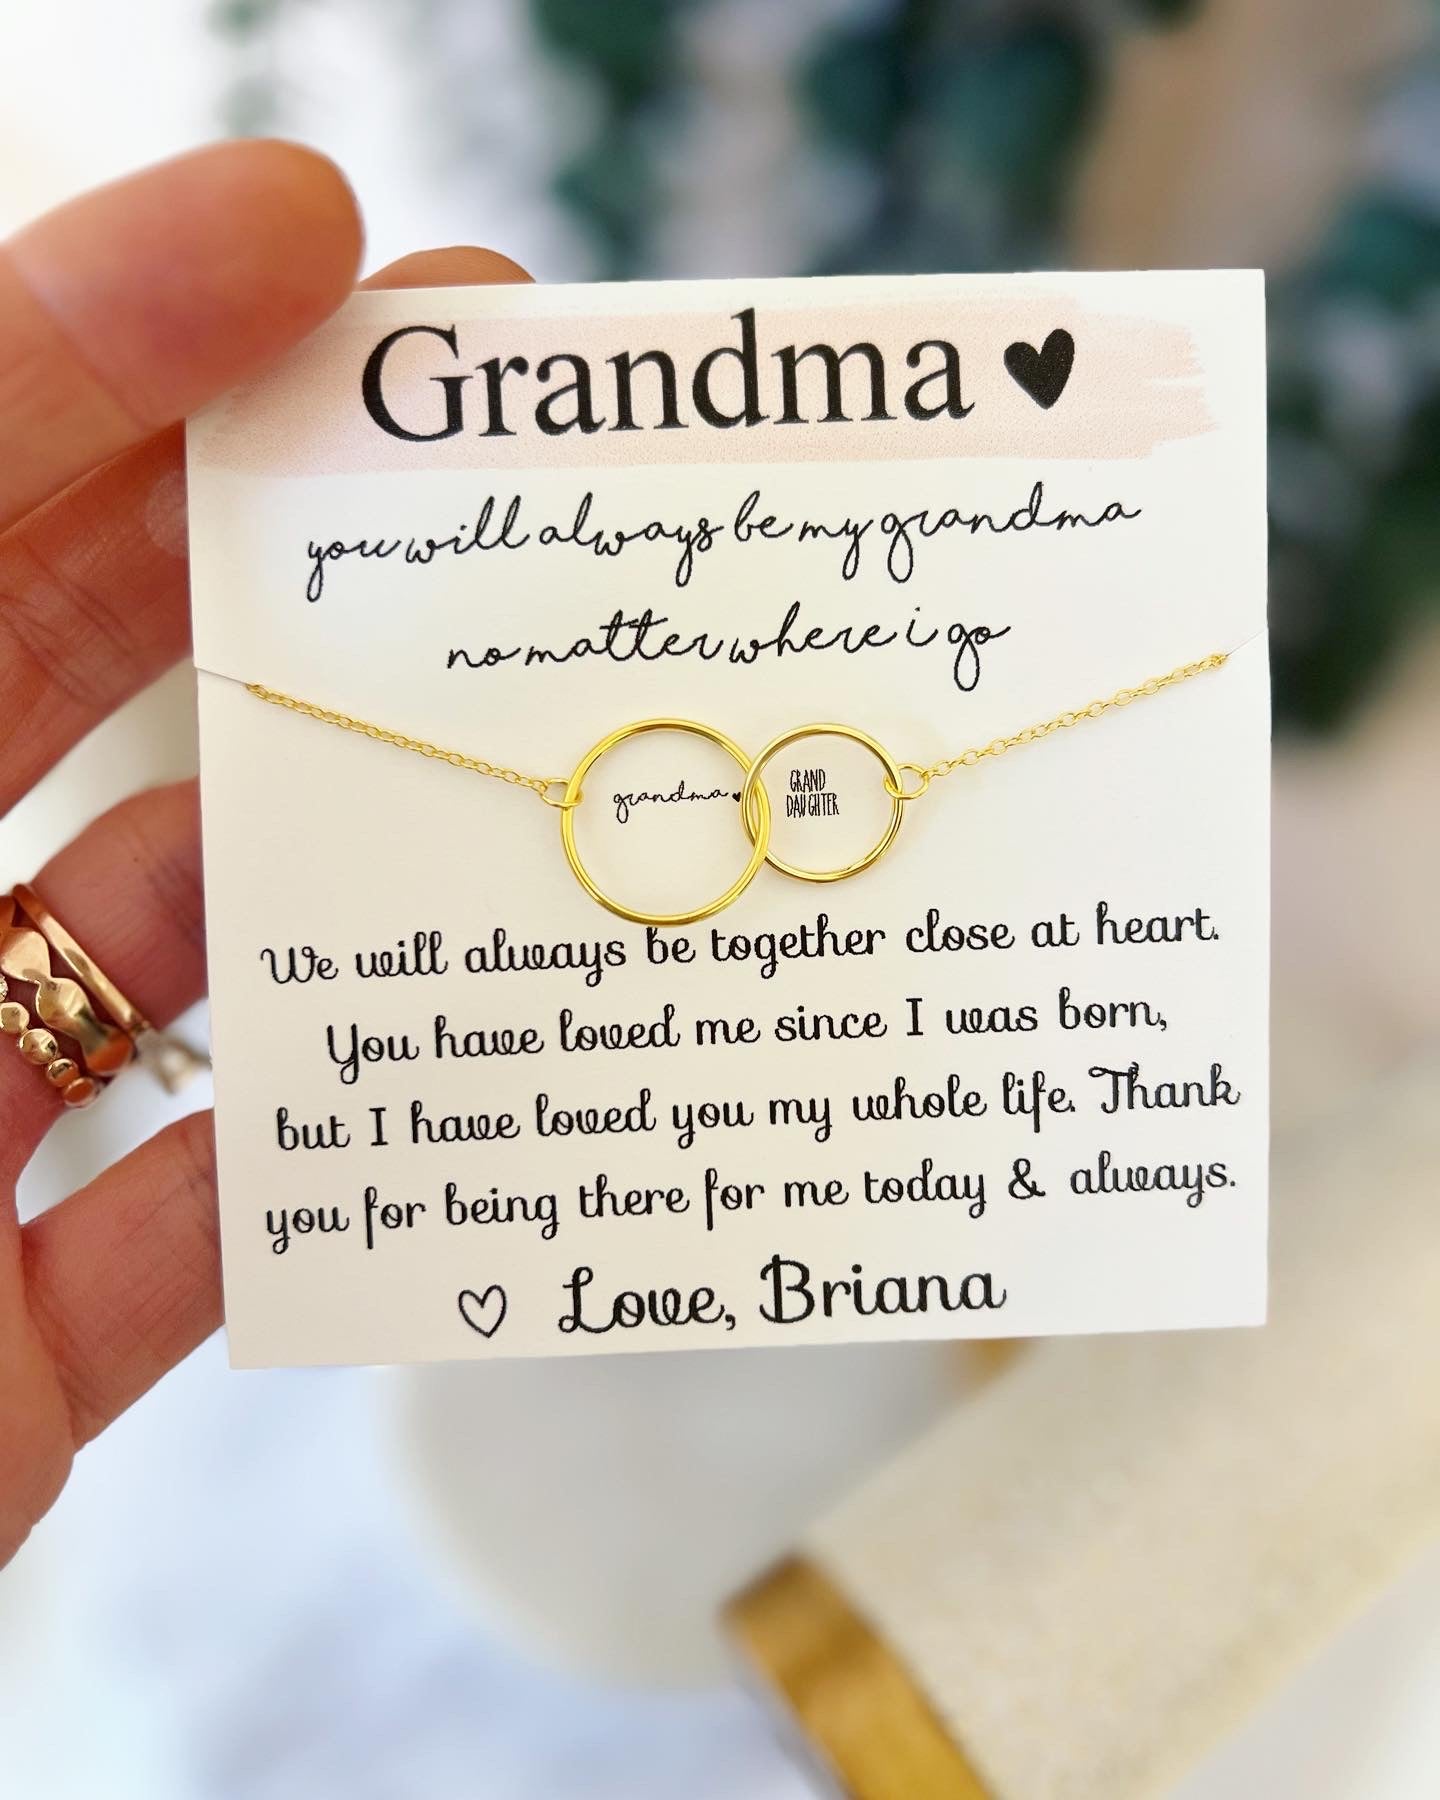 Grandmother Wedding Gift Necklace · Silver, Rose Gold, Gold · Lead & Nickel Free, Hypoallergenic · Box & Ribbon · L: 18 inch · Personalized Card · US